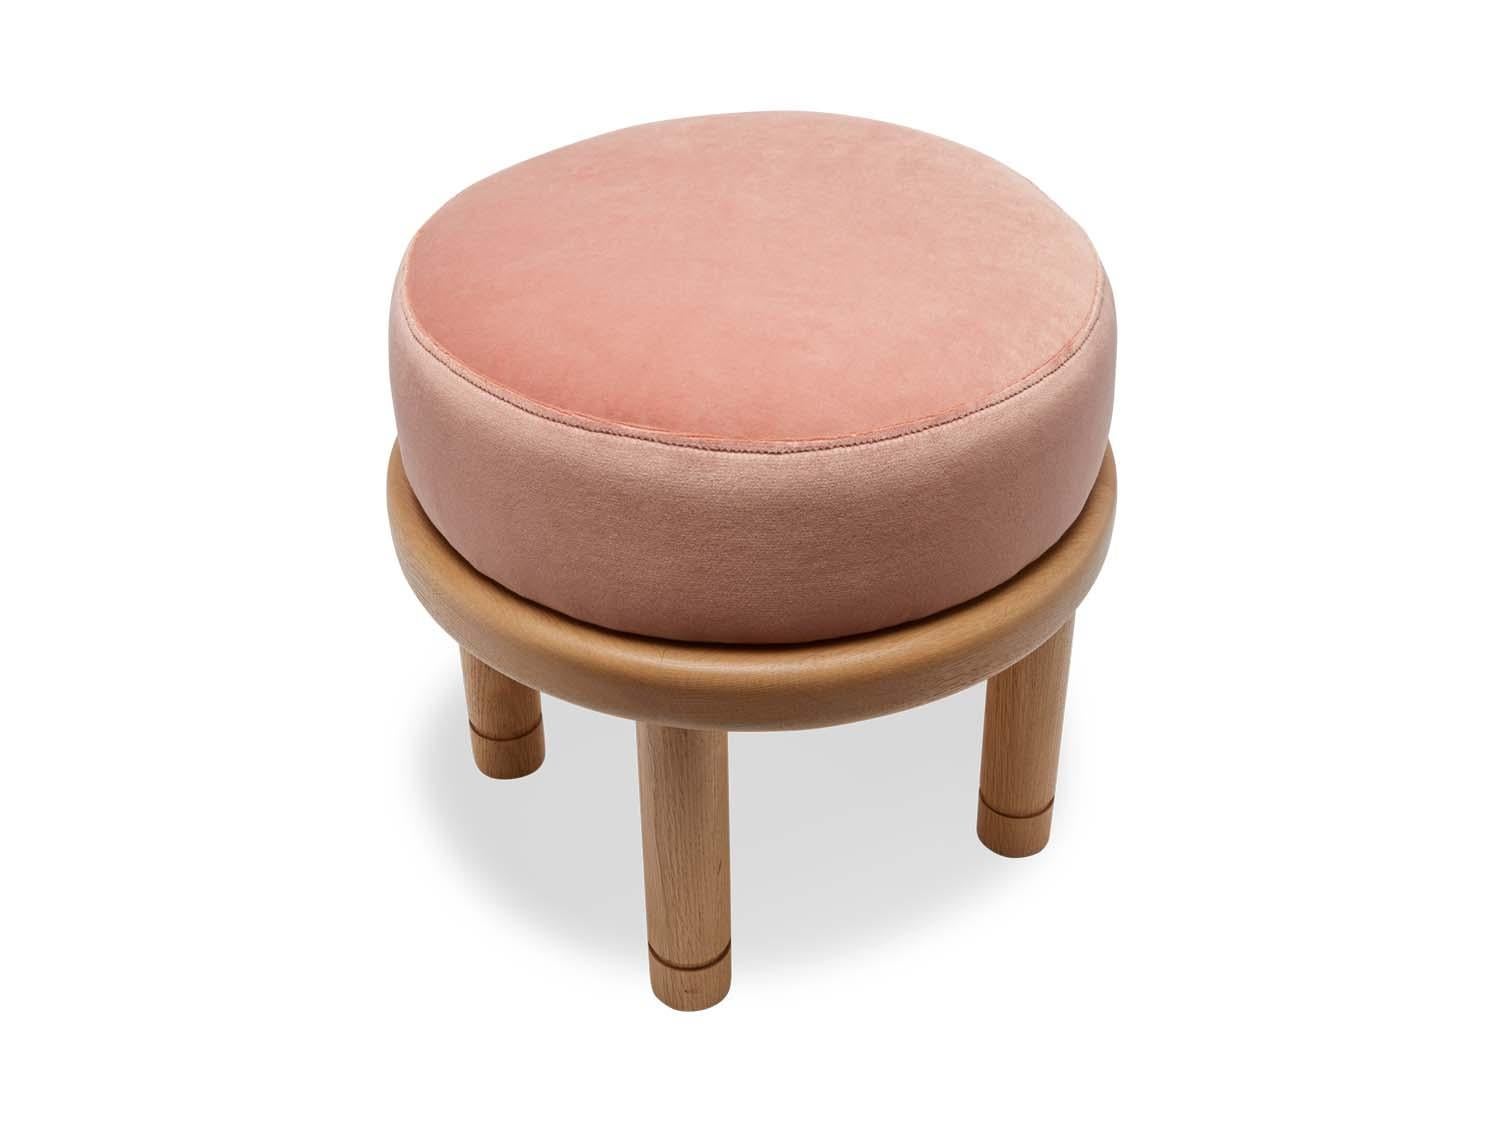 The Petite Moreno ottoman features a round solid wood base with four cylindrical legs and an upholstered top. Available in American walnut or white oak. Shown here in pink velvet and natural oak.

The Lawson-Fenning Collection is designed and